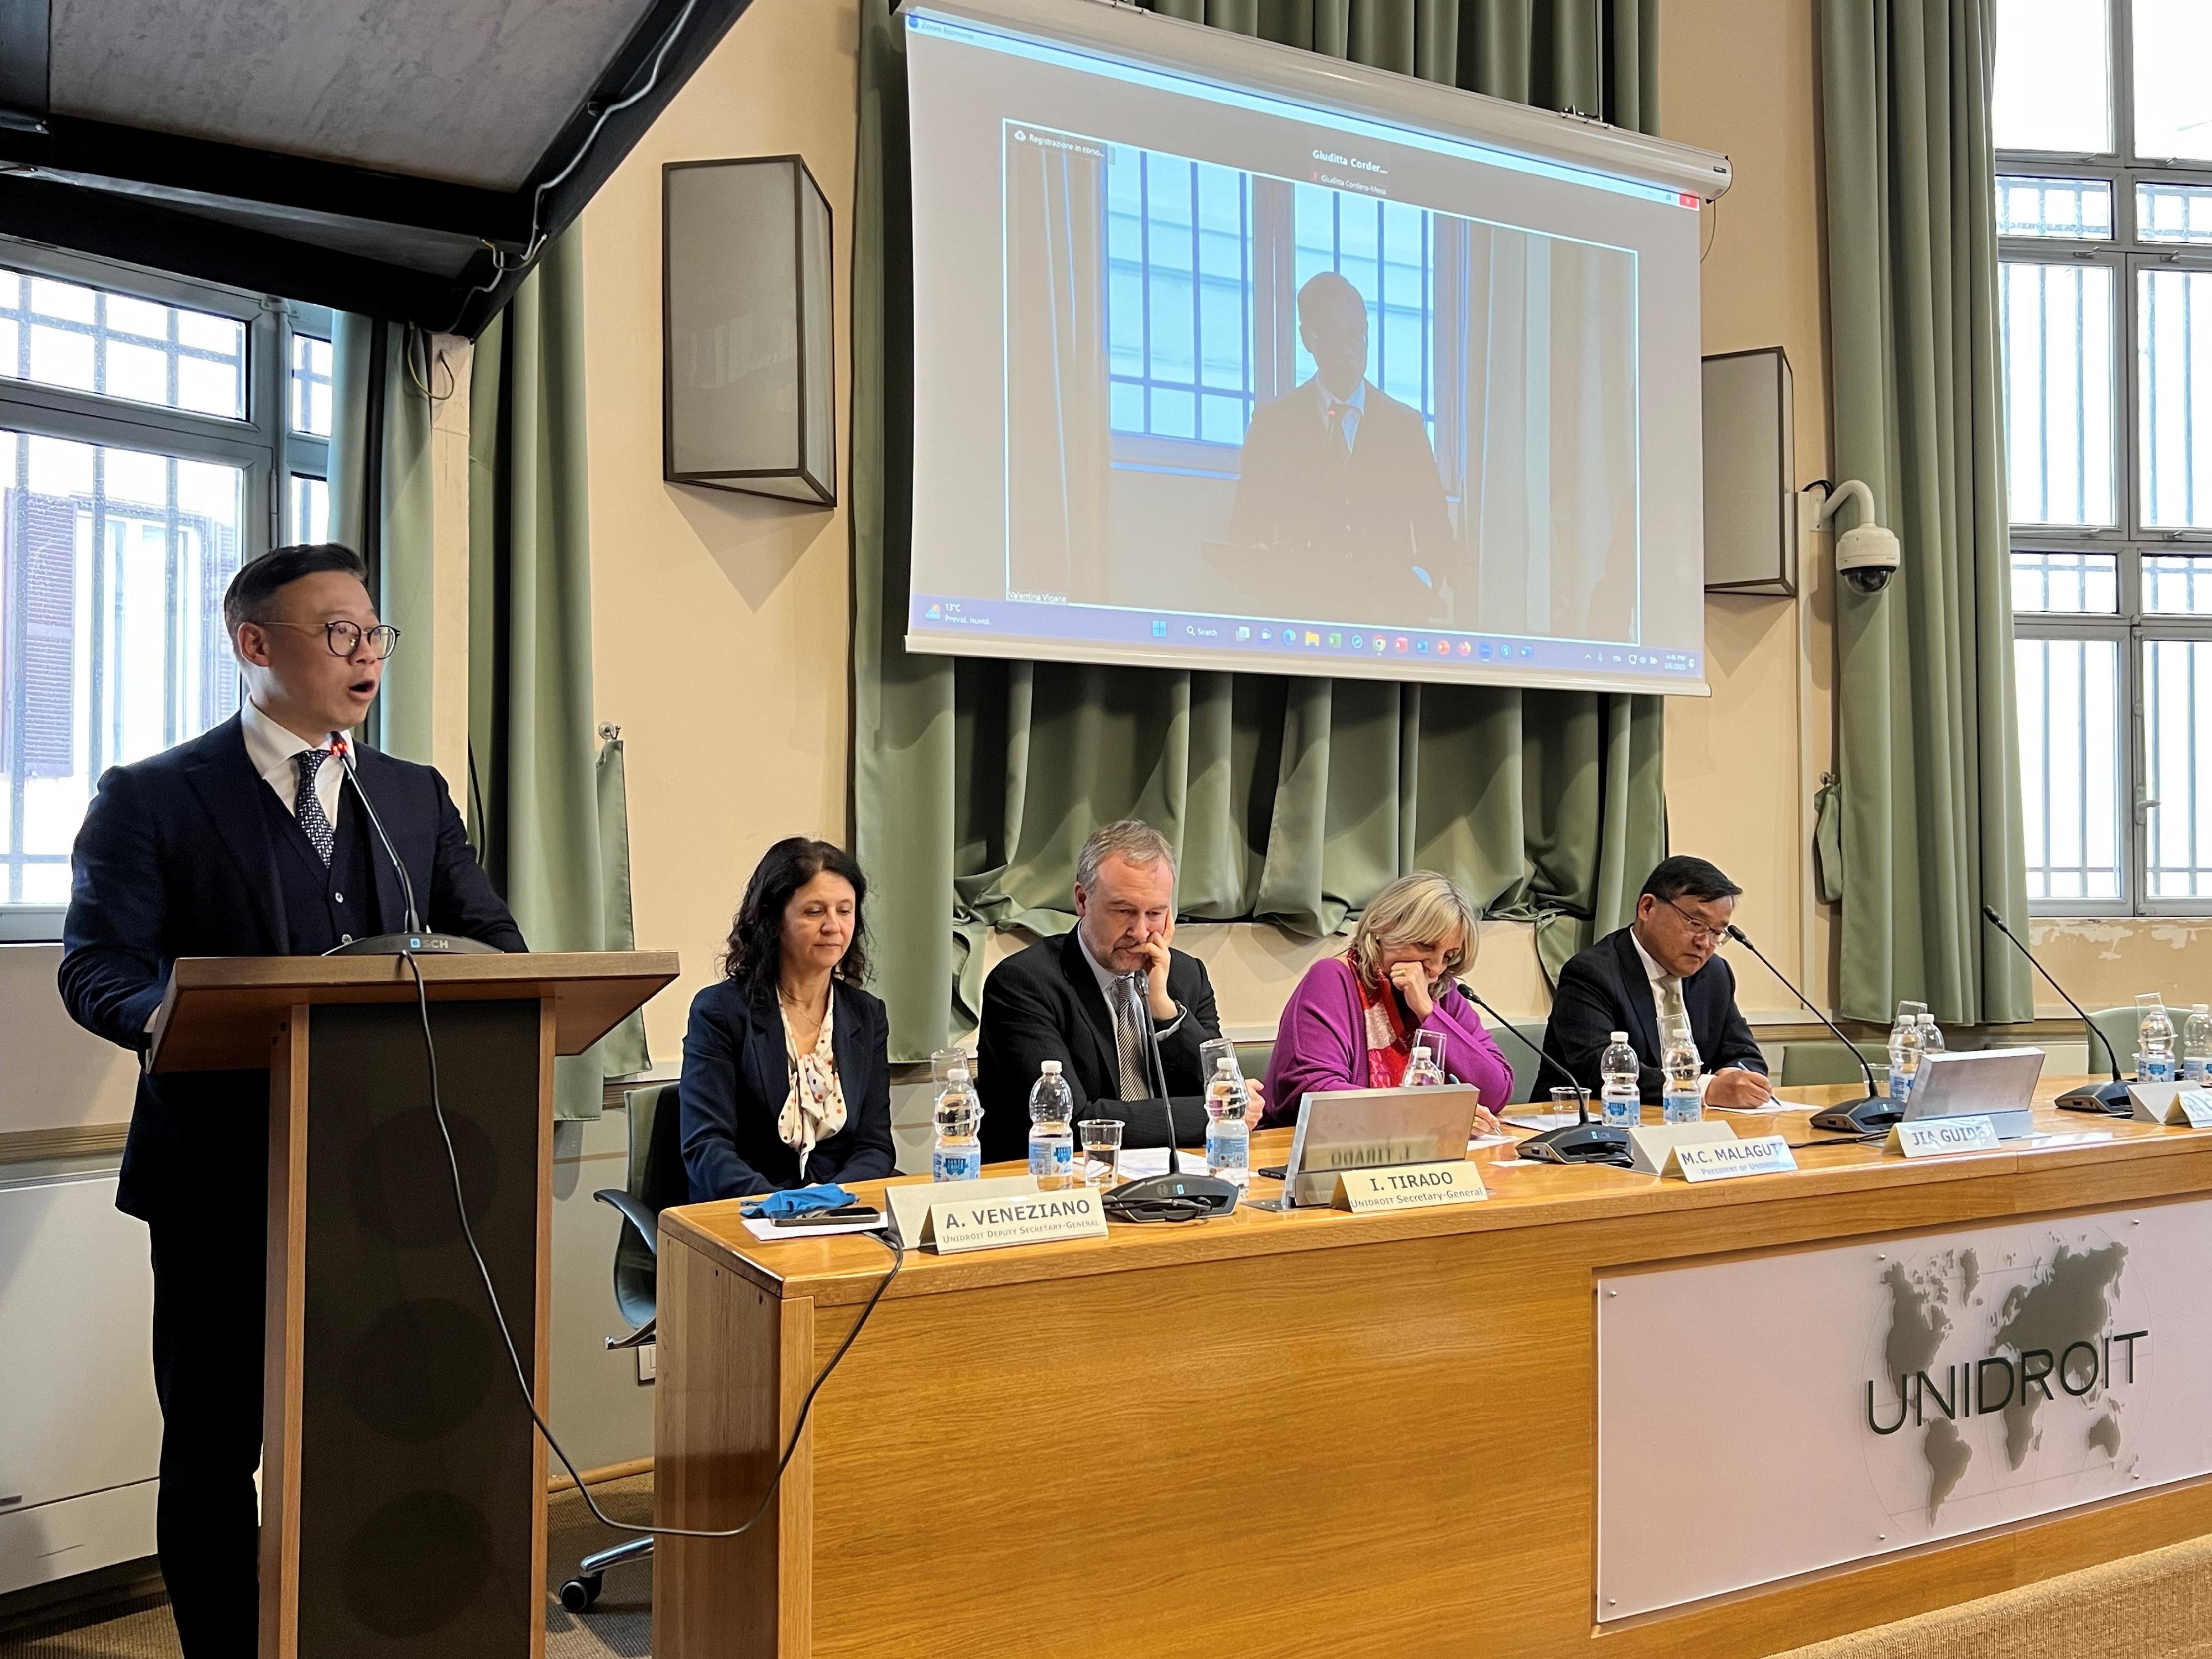 The Deputy Secretary for Justice, Mr Cheung Kwok-kwan, on March 6 (Rome time) attended in Rome, Italy, a conference co-organised by the International Institute for the Unification of Private Law and the Embassy of the People's Republic of China in the Republic of Italy for local business and legal communities. Photo shows Mr Cheung (first left) speaking at the conference.